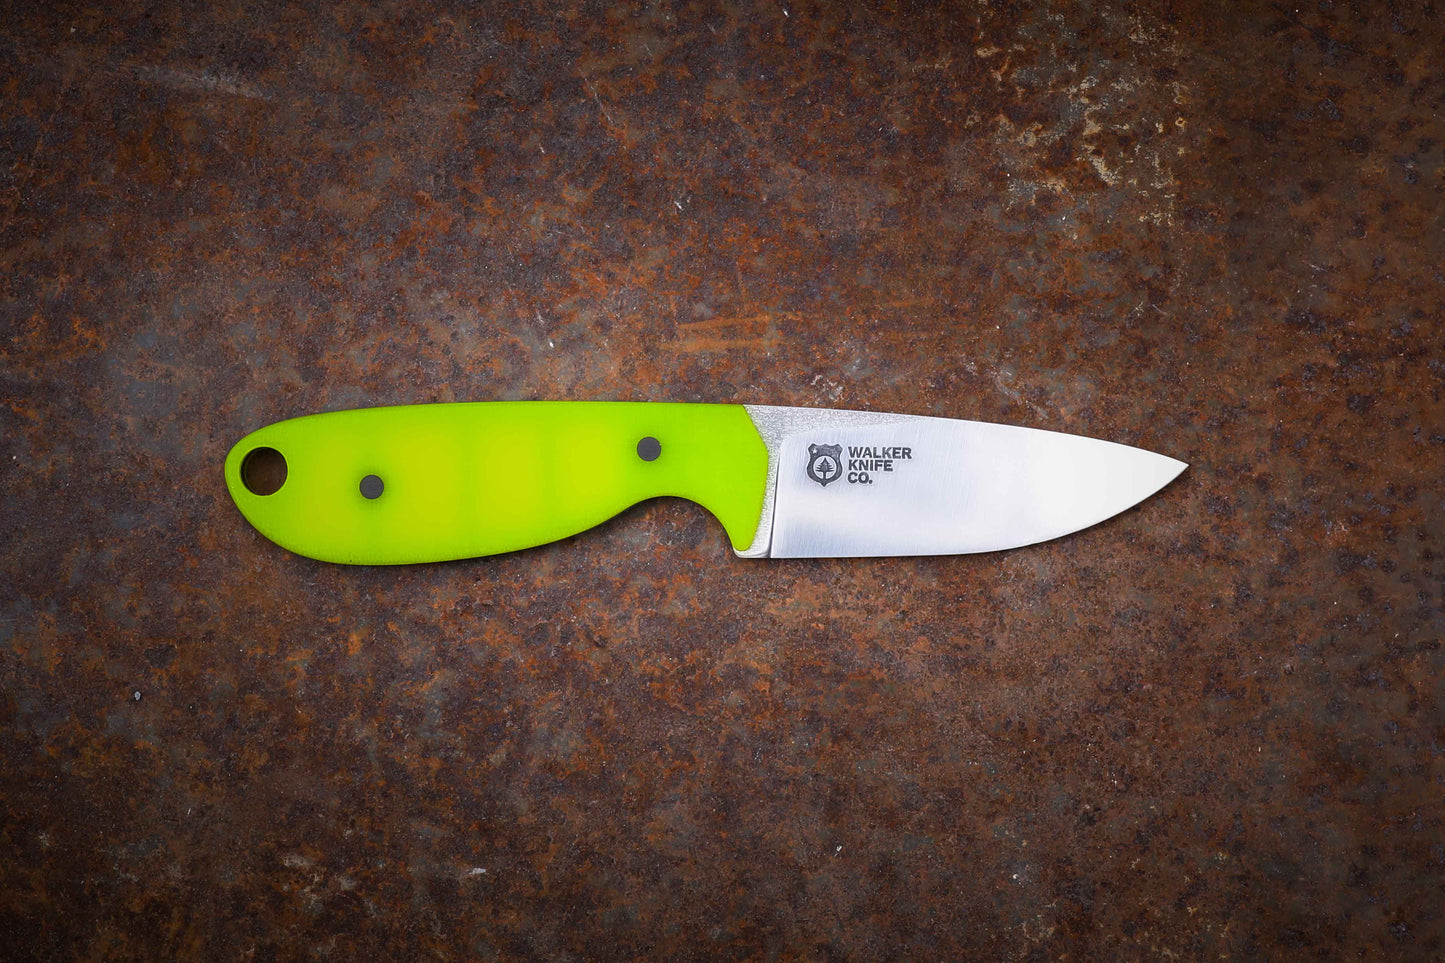 River Knife / Dayglow Yellow with Black Kydex Sheath